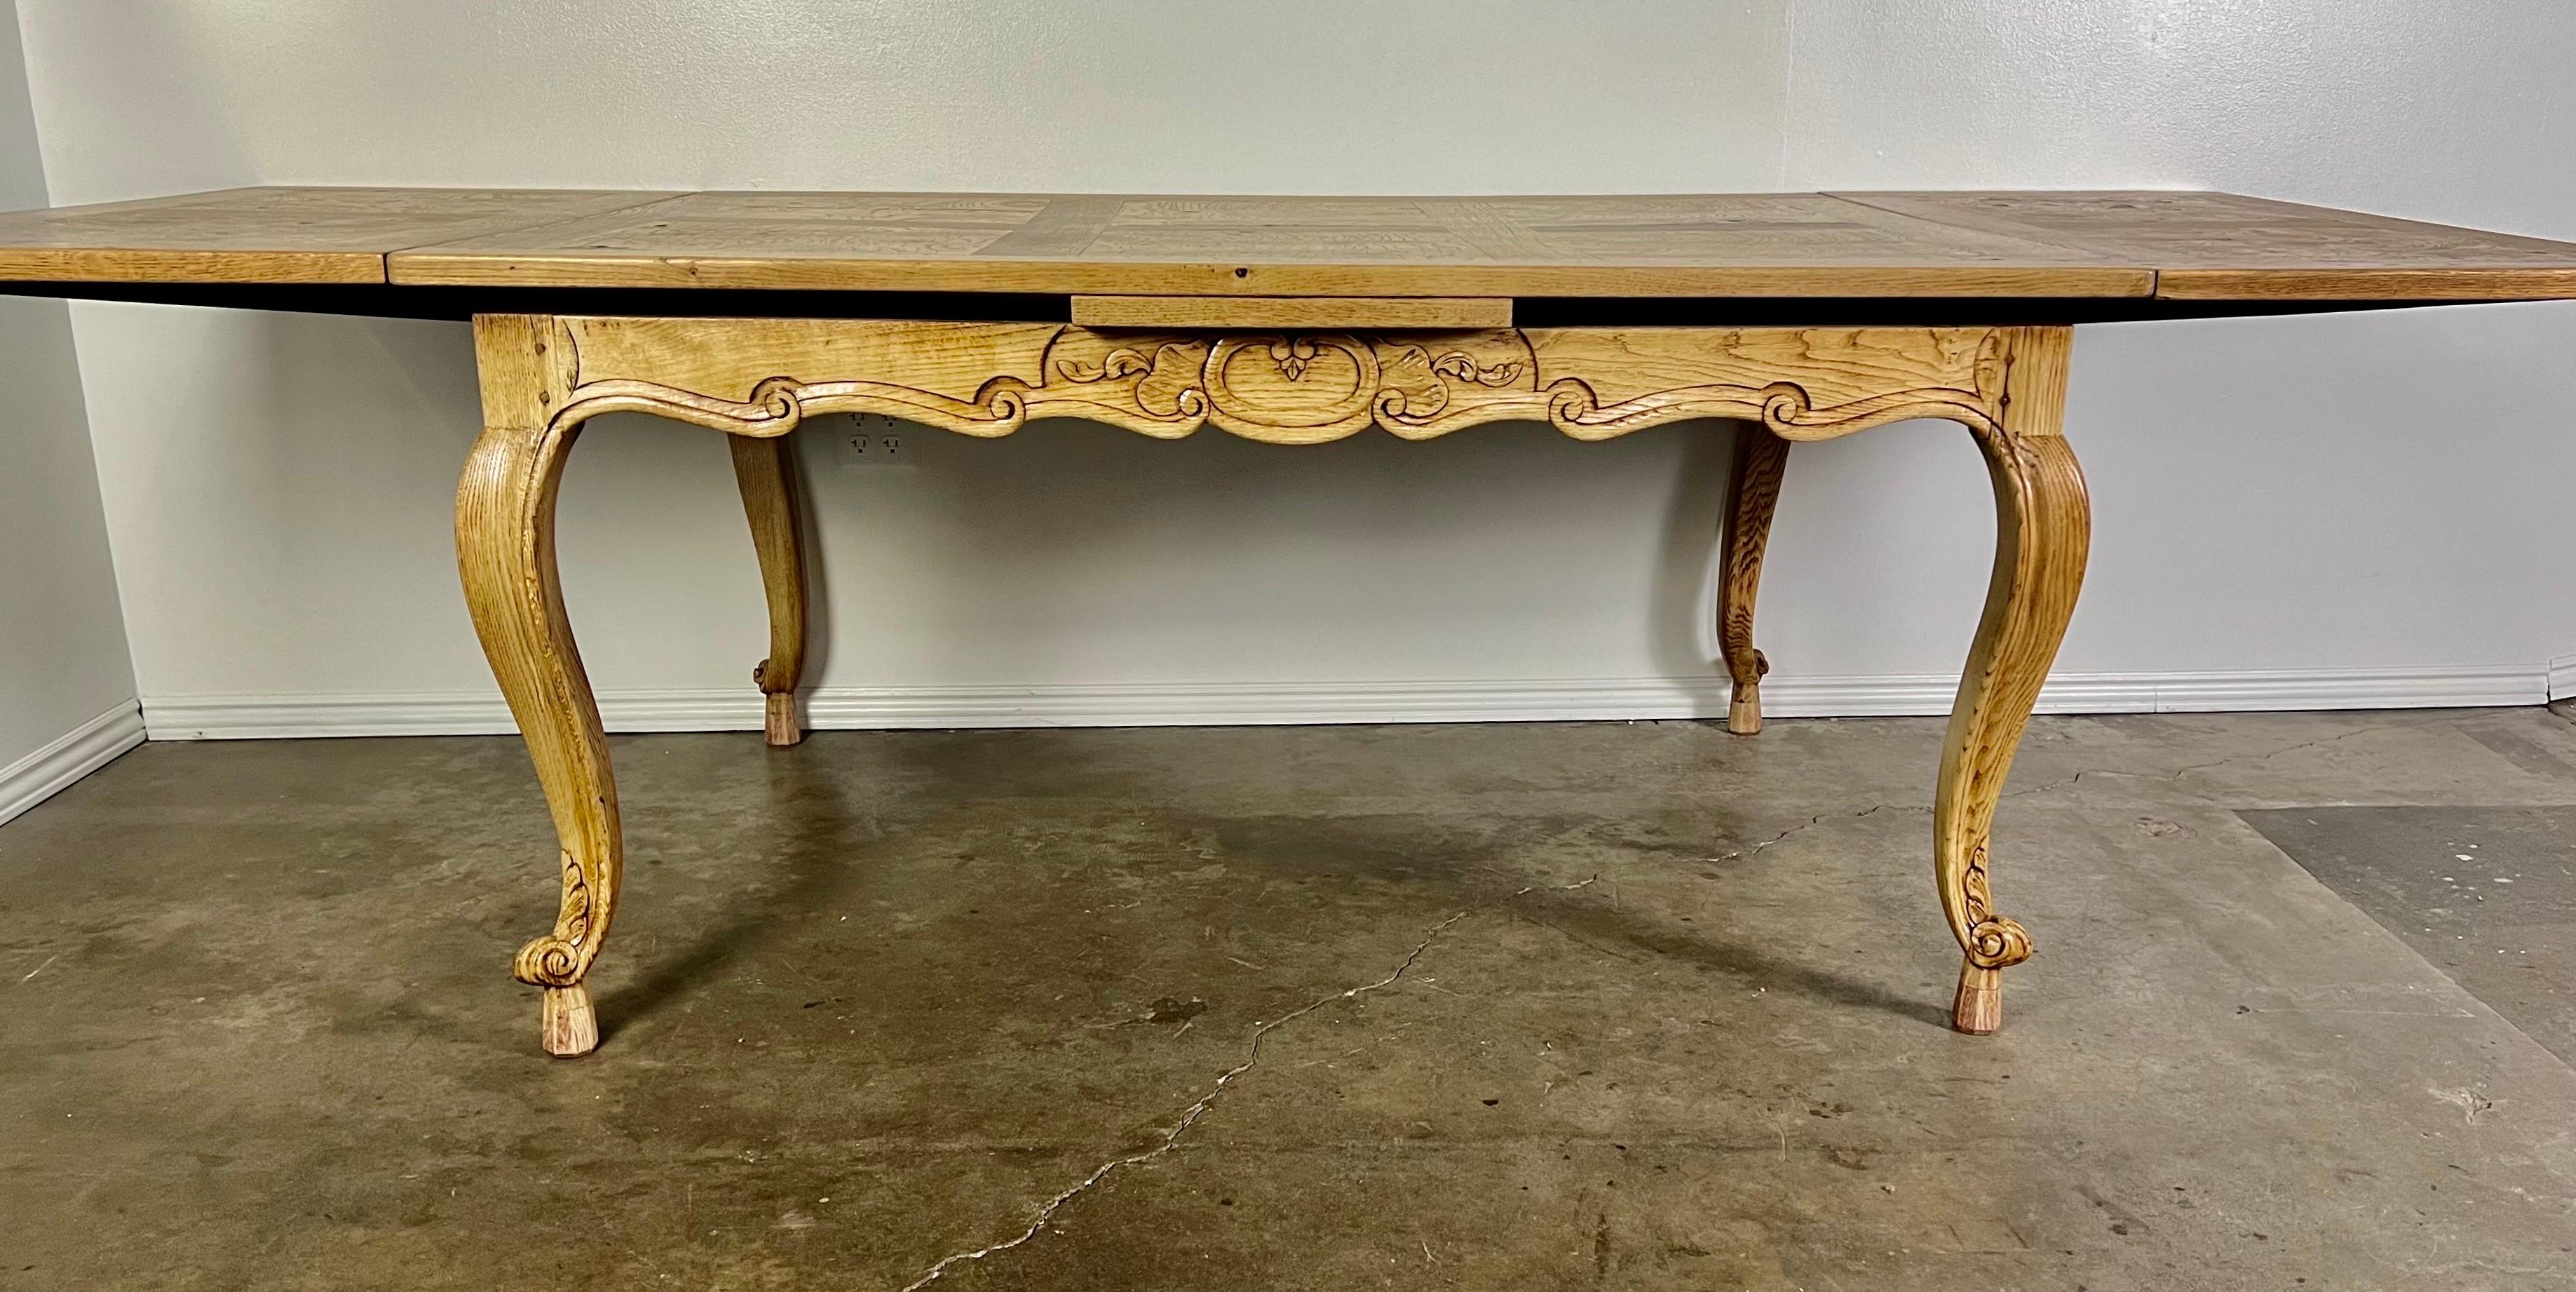 19th century French Provincial style white oak & burled walnut dining table with two leaves. The French table stands on four cabriole legs with rams head feet. There is a simple scrolled design on the apron of the table base. The top has a geometric